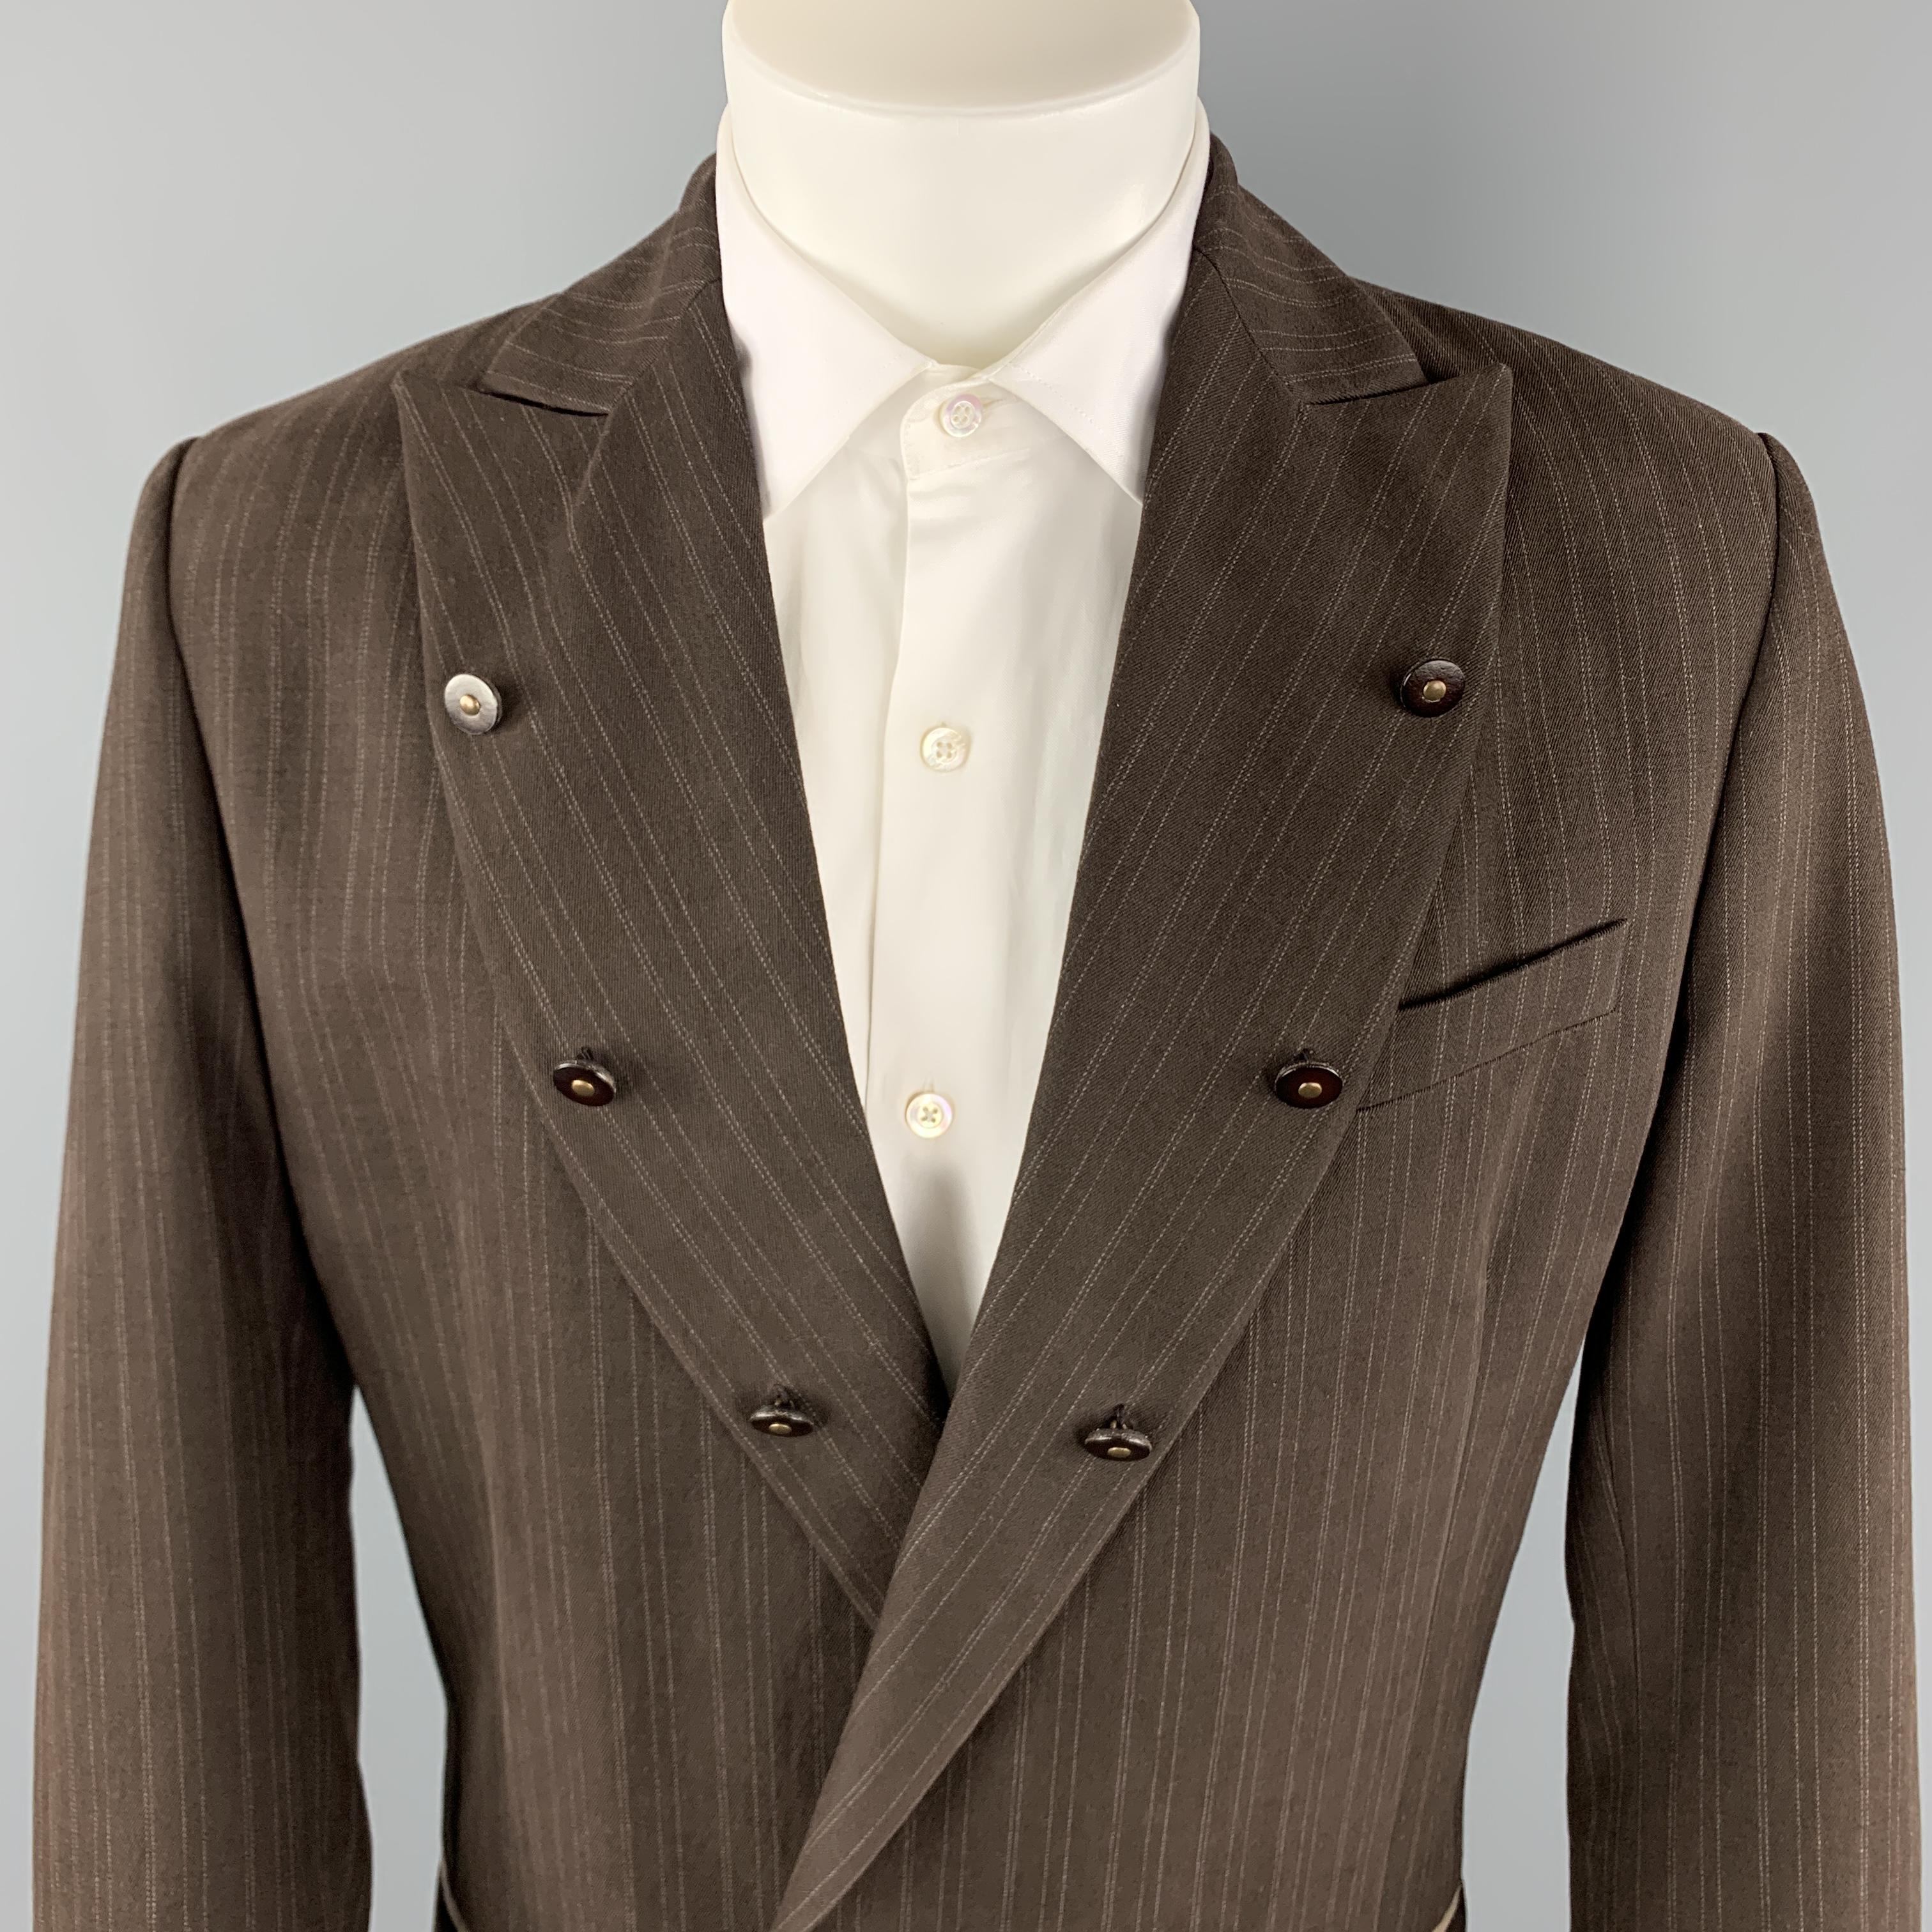 ANDREW MACKENZIE Sport Coat comes in a brown stripe cotton / wool material, with a peak lapel, buttons trim, slit and flap pockets and buttoned cuffs. Made in Italy.

Excellent Pre-Owned Condition.
Marked: IT 48

Measurements:

Shoulder: 18 in.